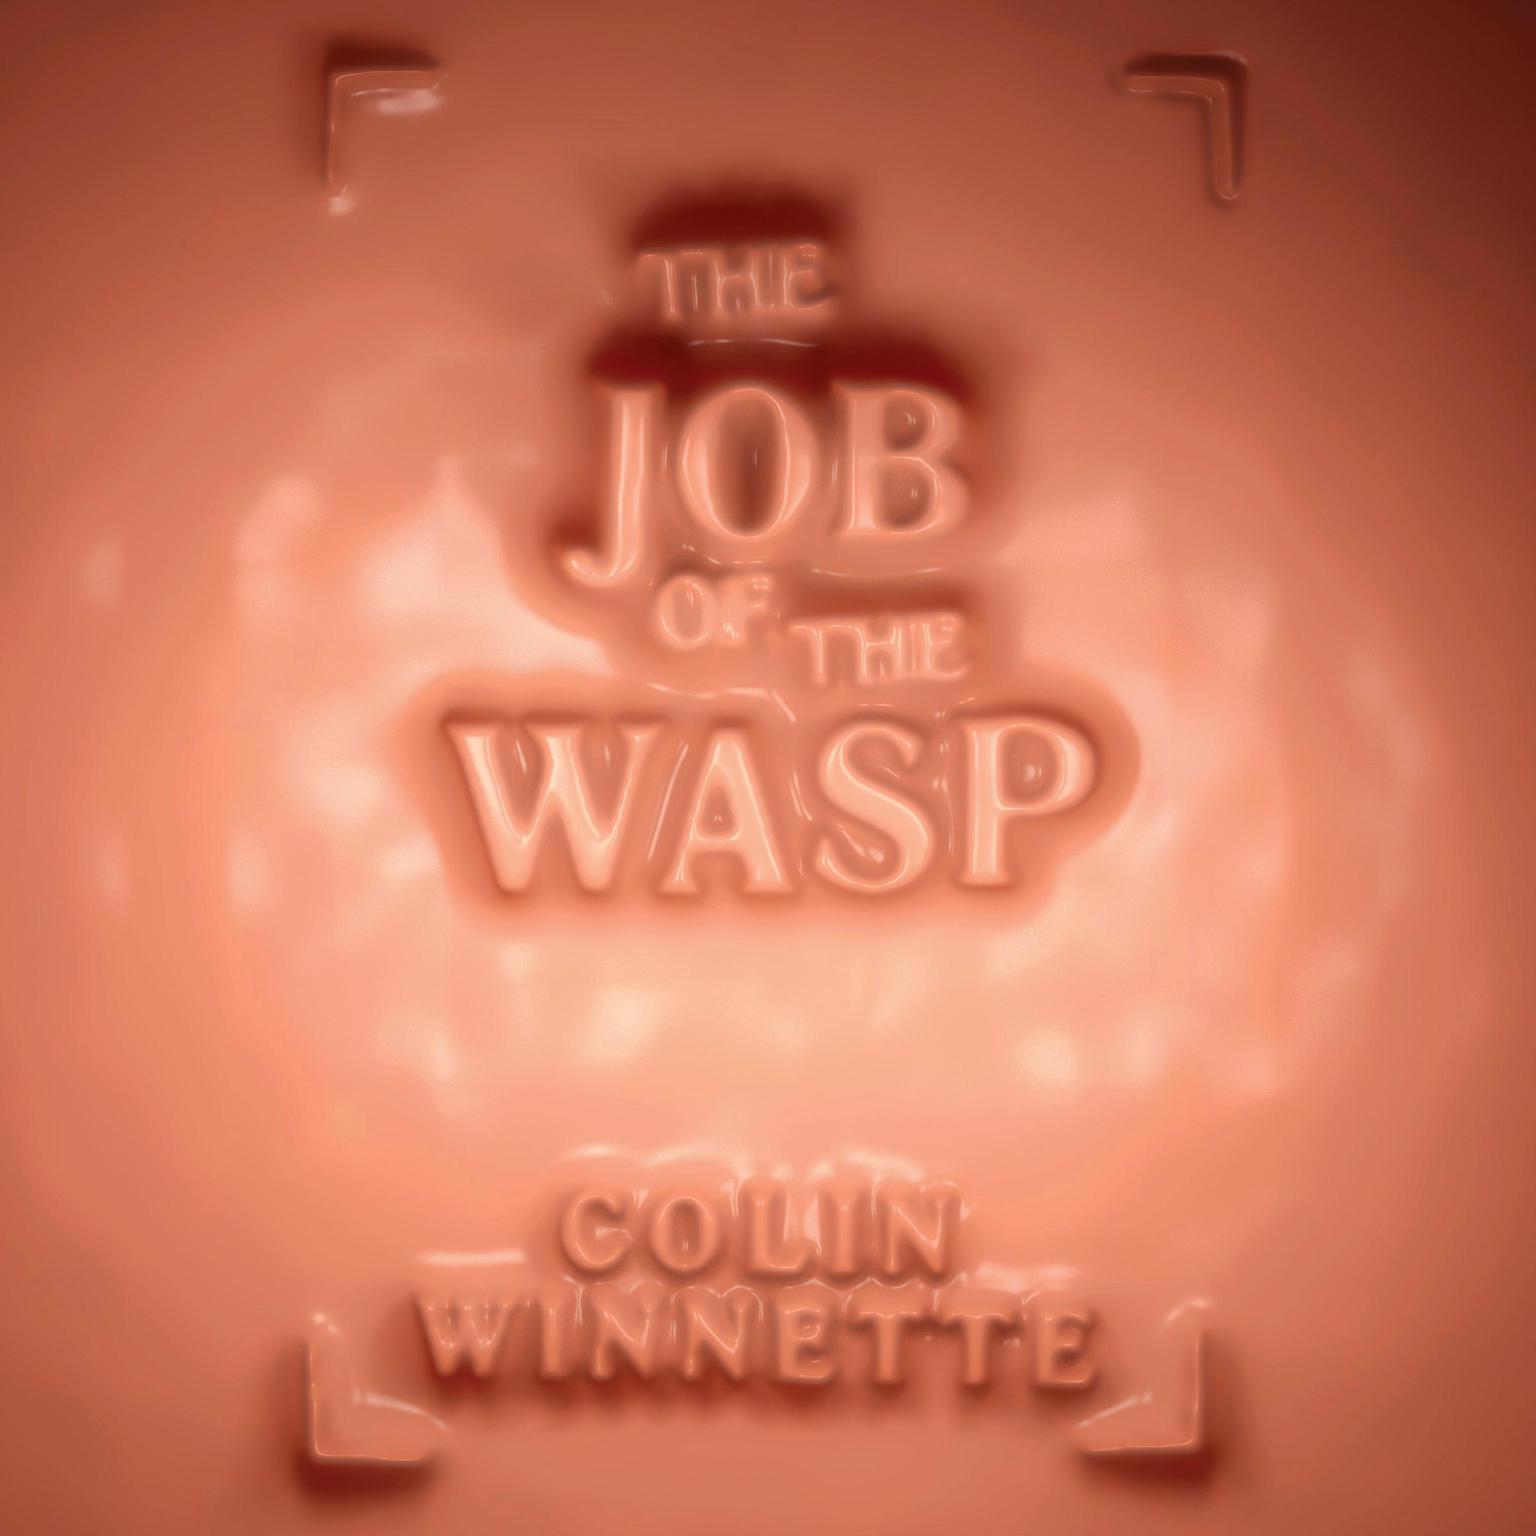 The Job of the Wasp Audiobook, by Colin Winnette